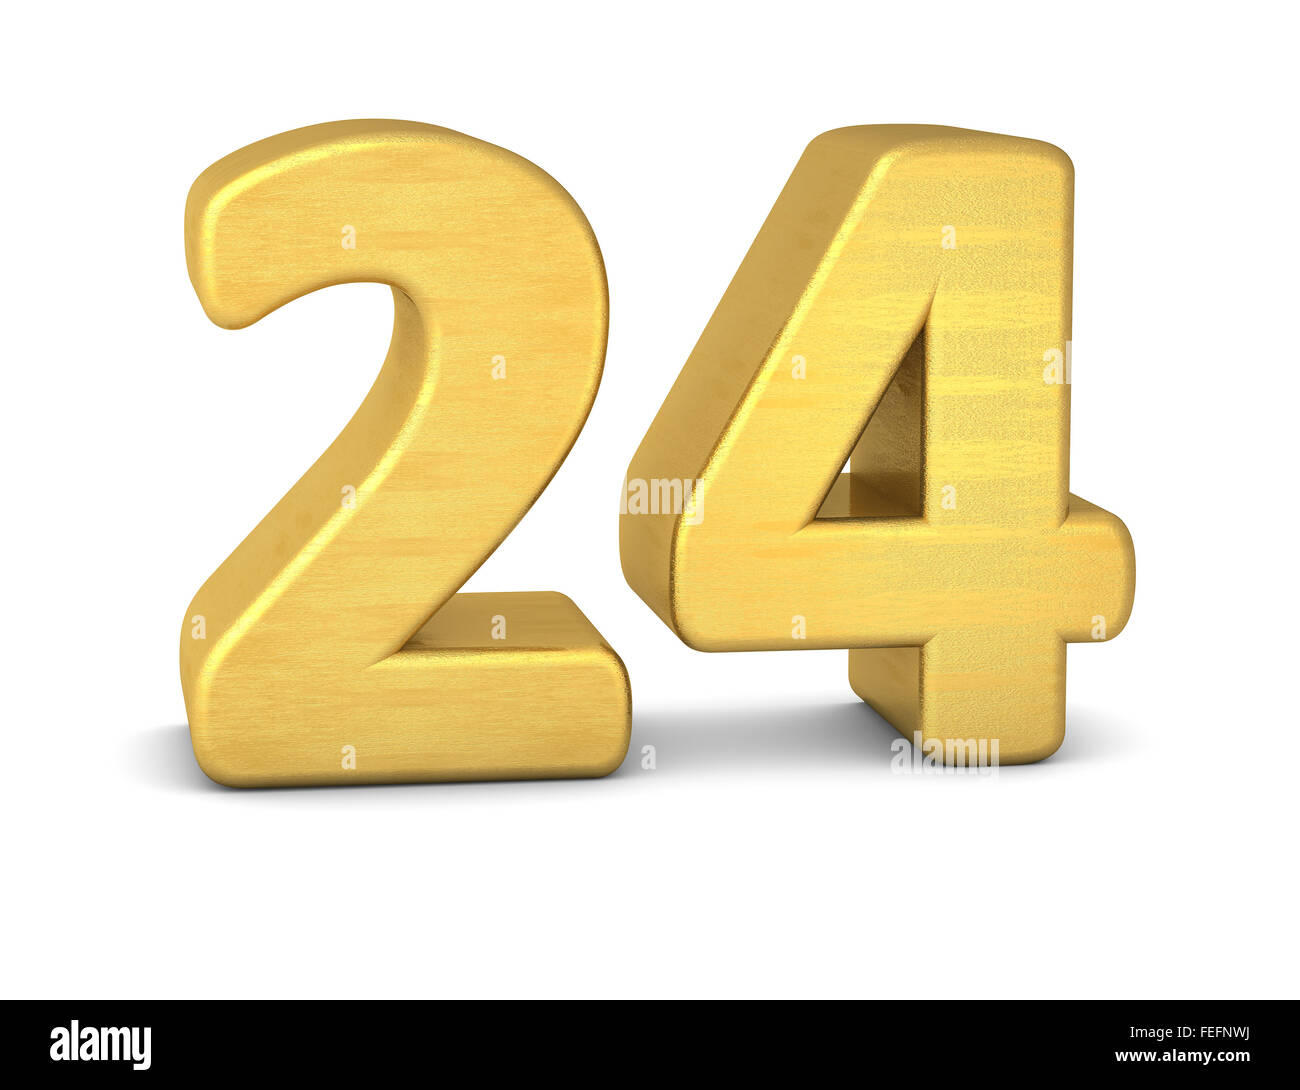 9+ Thousand Color Number 24 Royalty-Free Images, Stock Photos